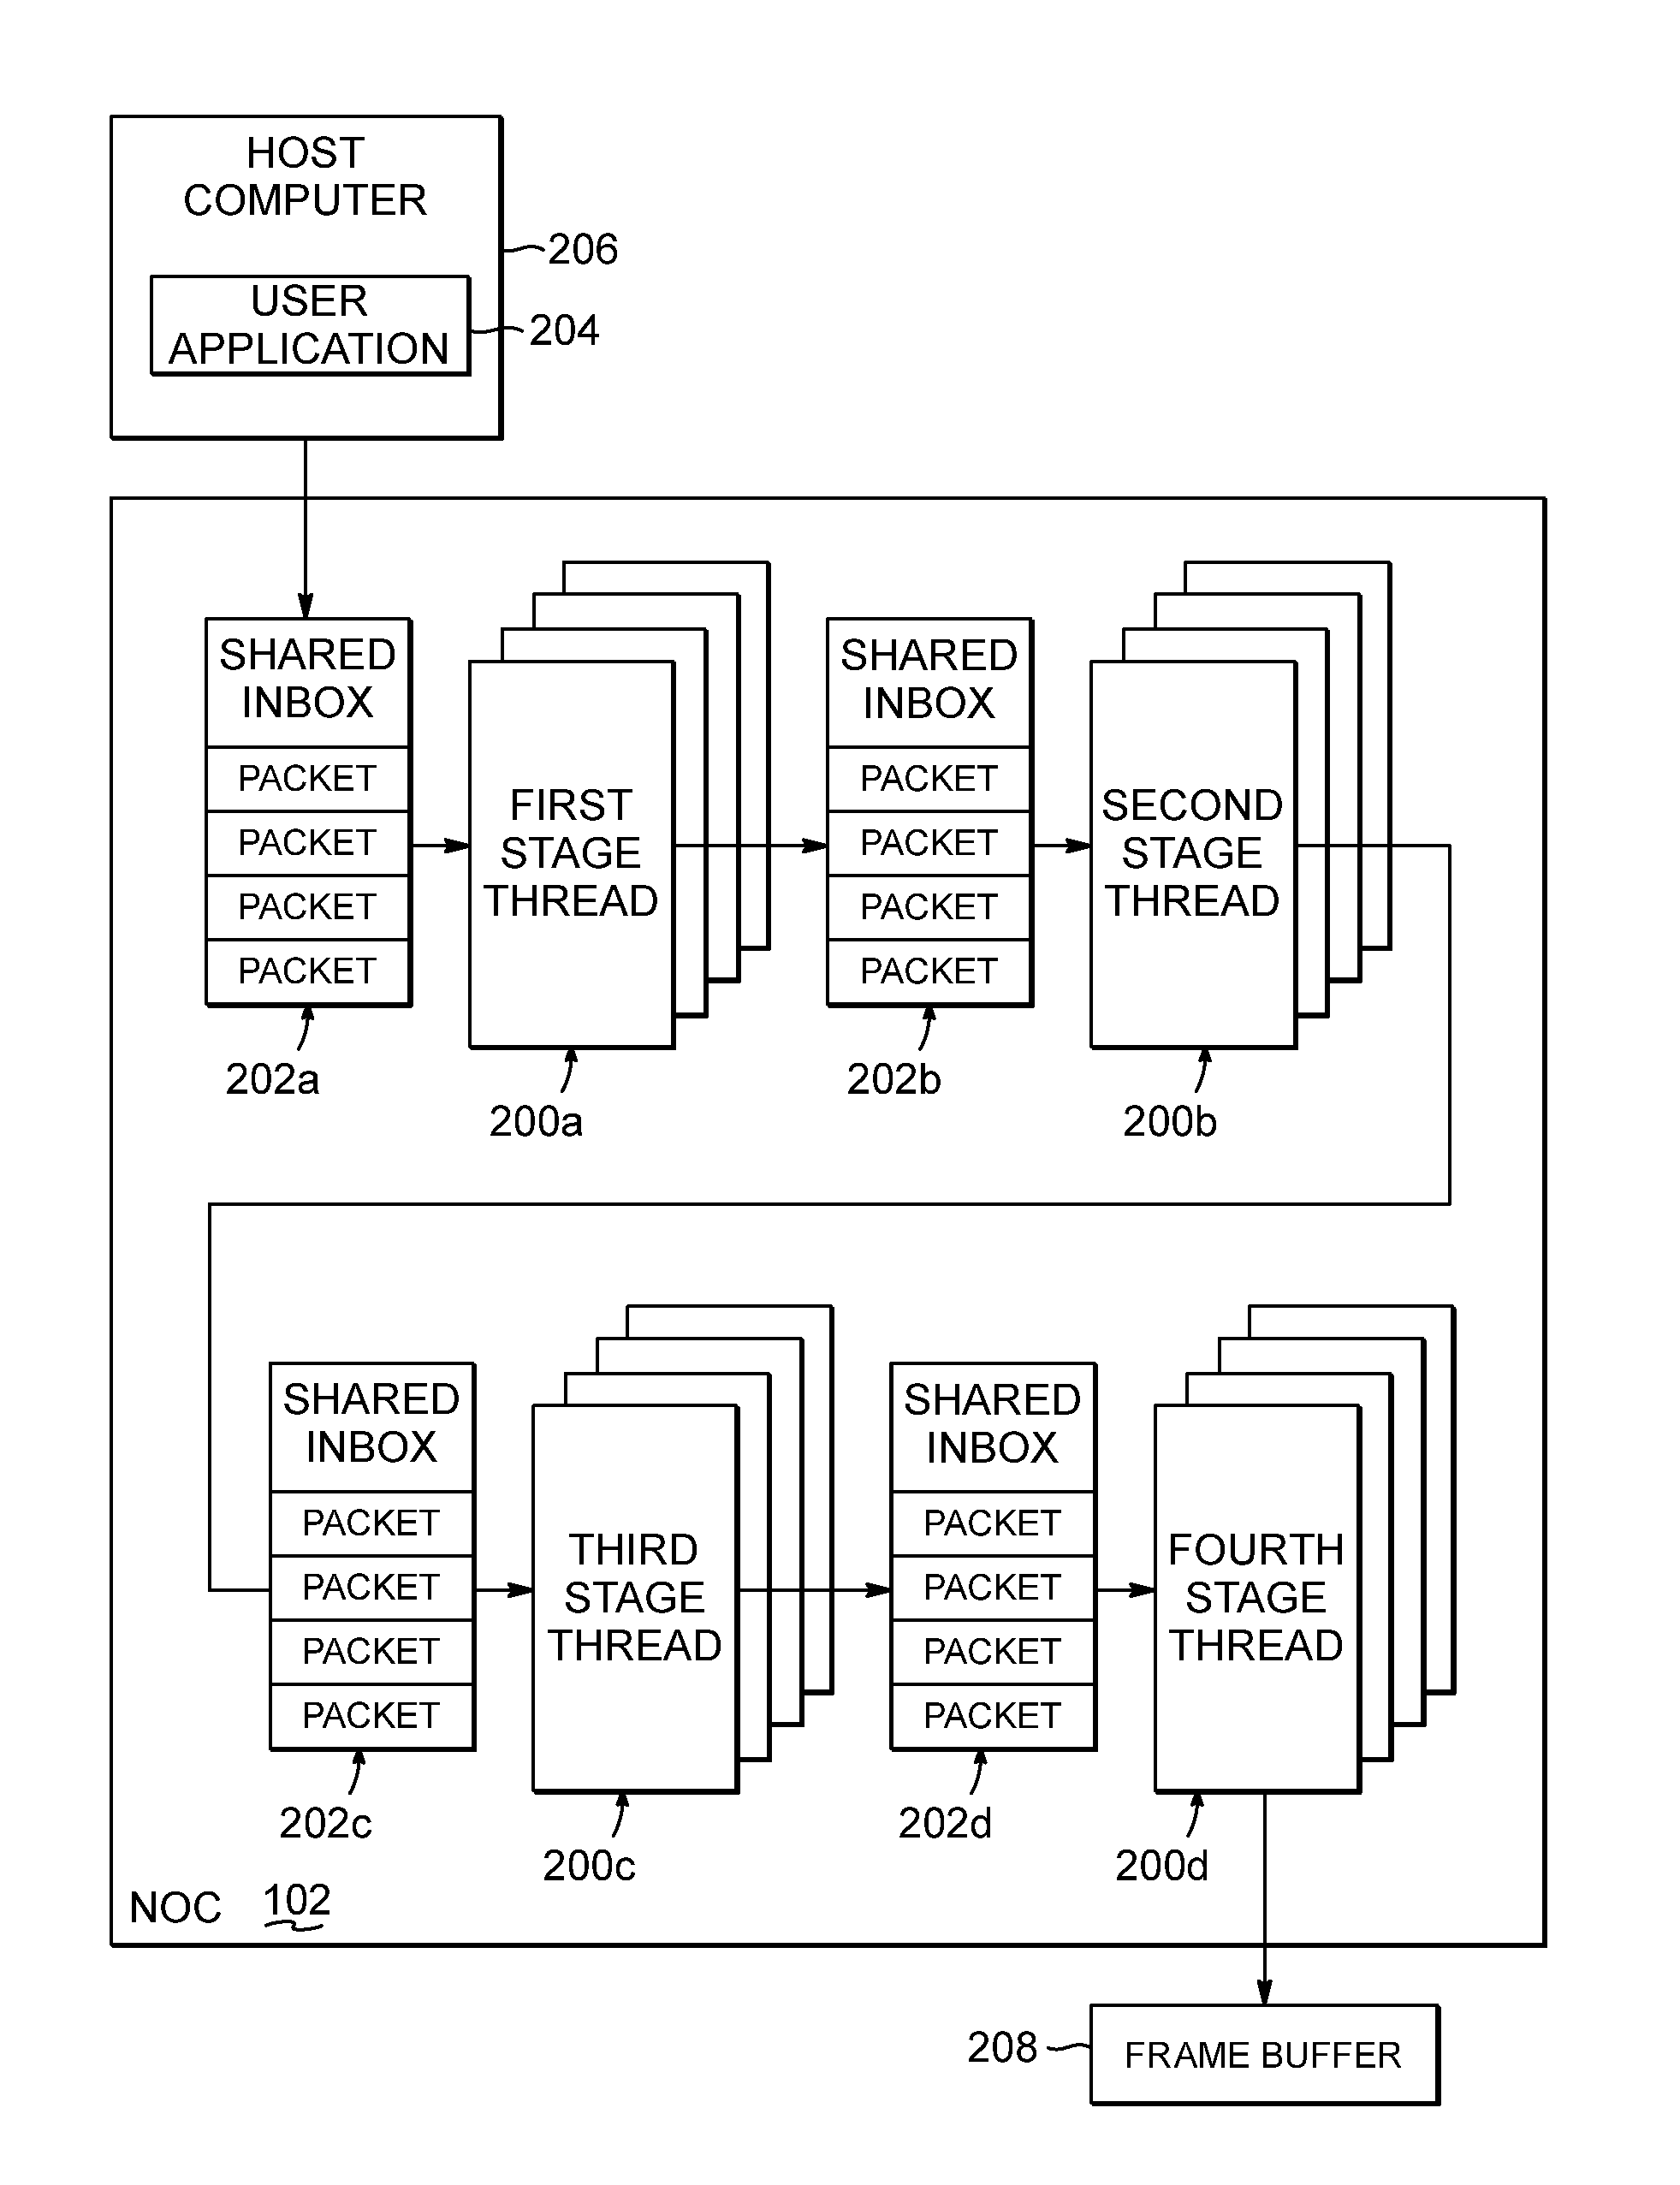 Indirect inter-thread communication using a shared pool of inboxes